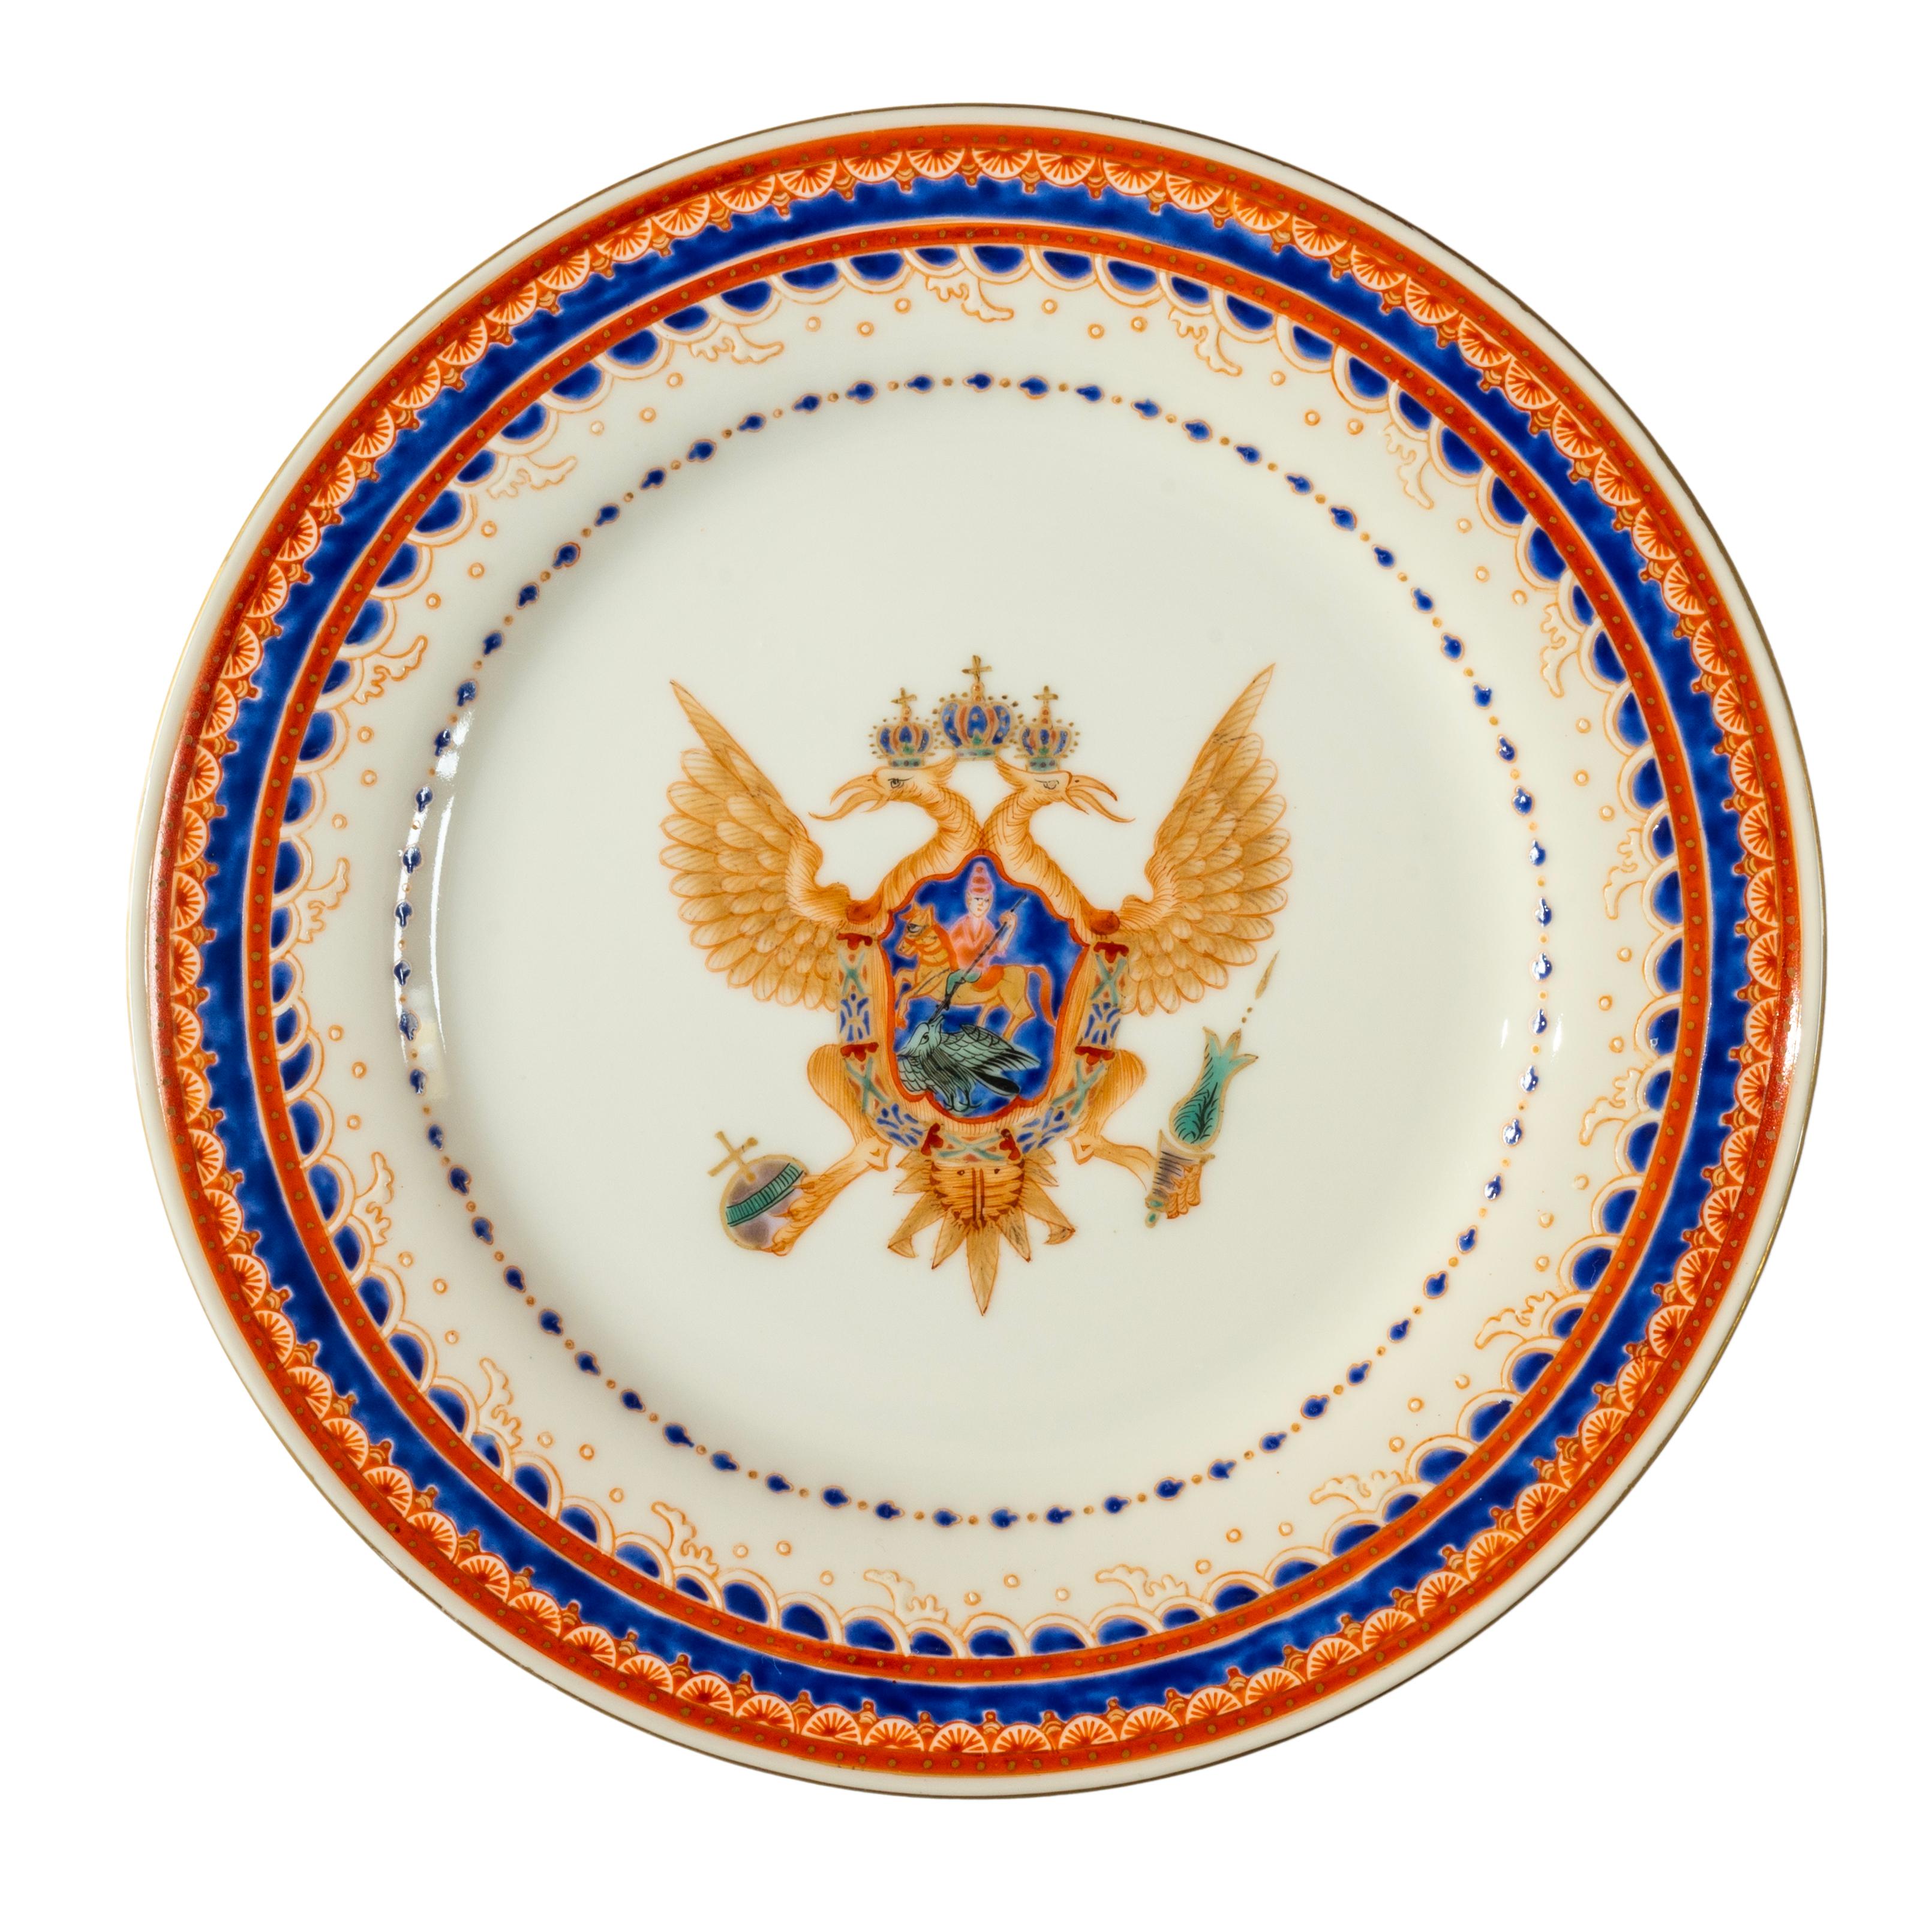 Colorful and festive dinner plates each decorated with an imperial Russian double headed eagle in the center, enclosing a deep blue shield of St. George Slaying the Dragon, the symbol of Moscow, Russia's ancient capital. The outer border features